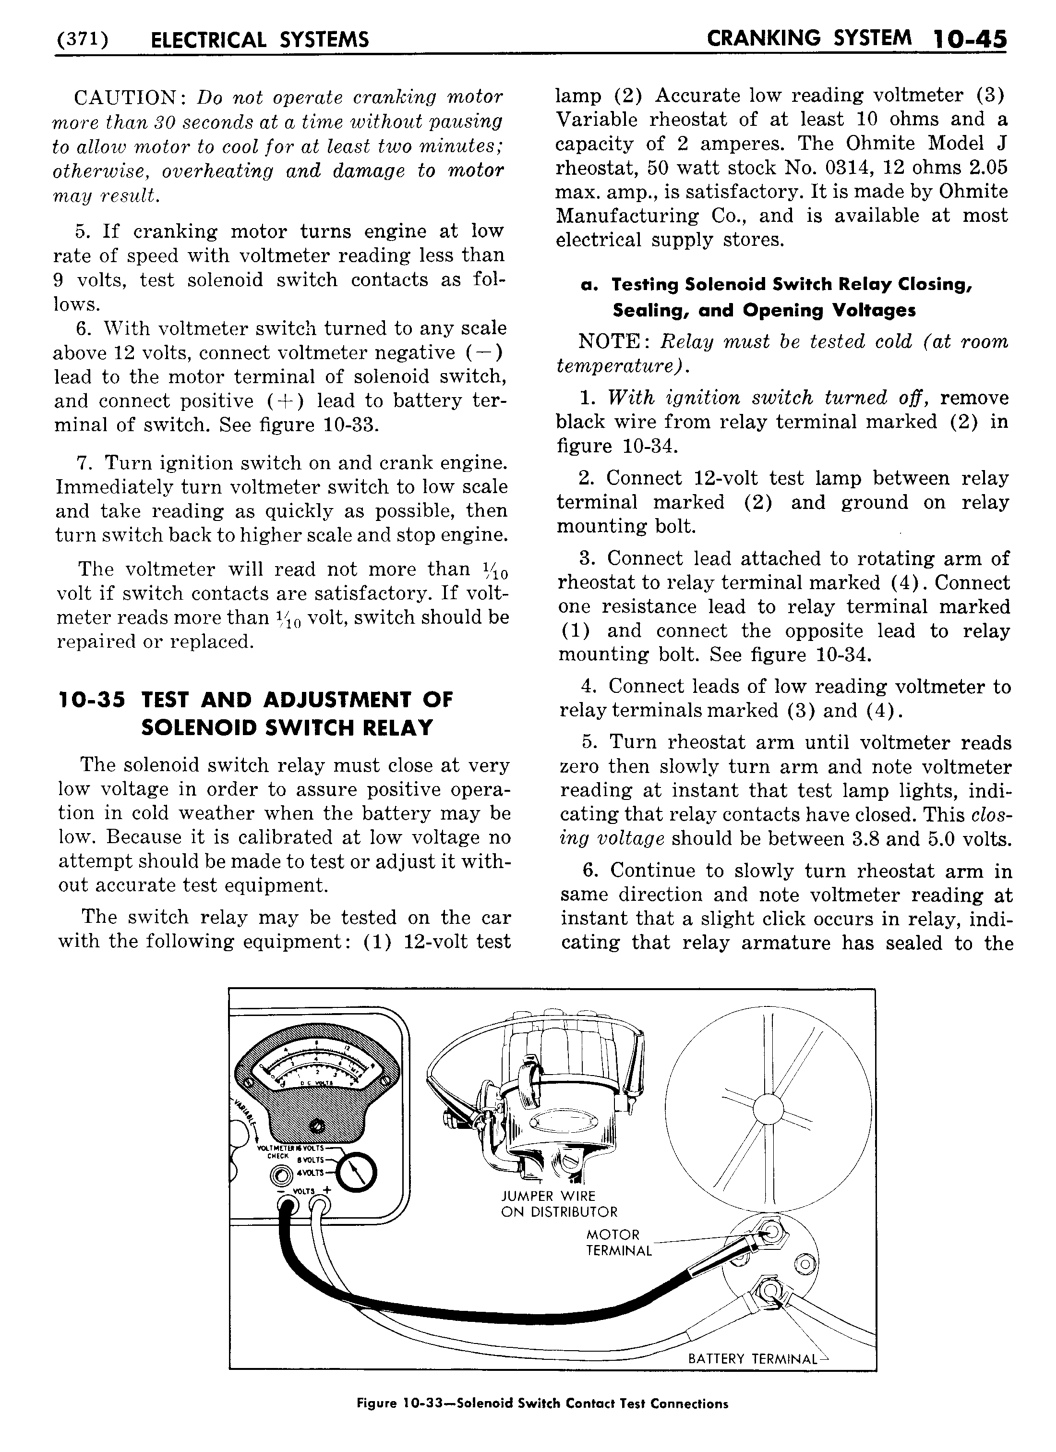 n_11 1956 Buick Shop Manual - Electrical Systems-045-045.jpg